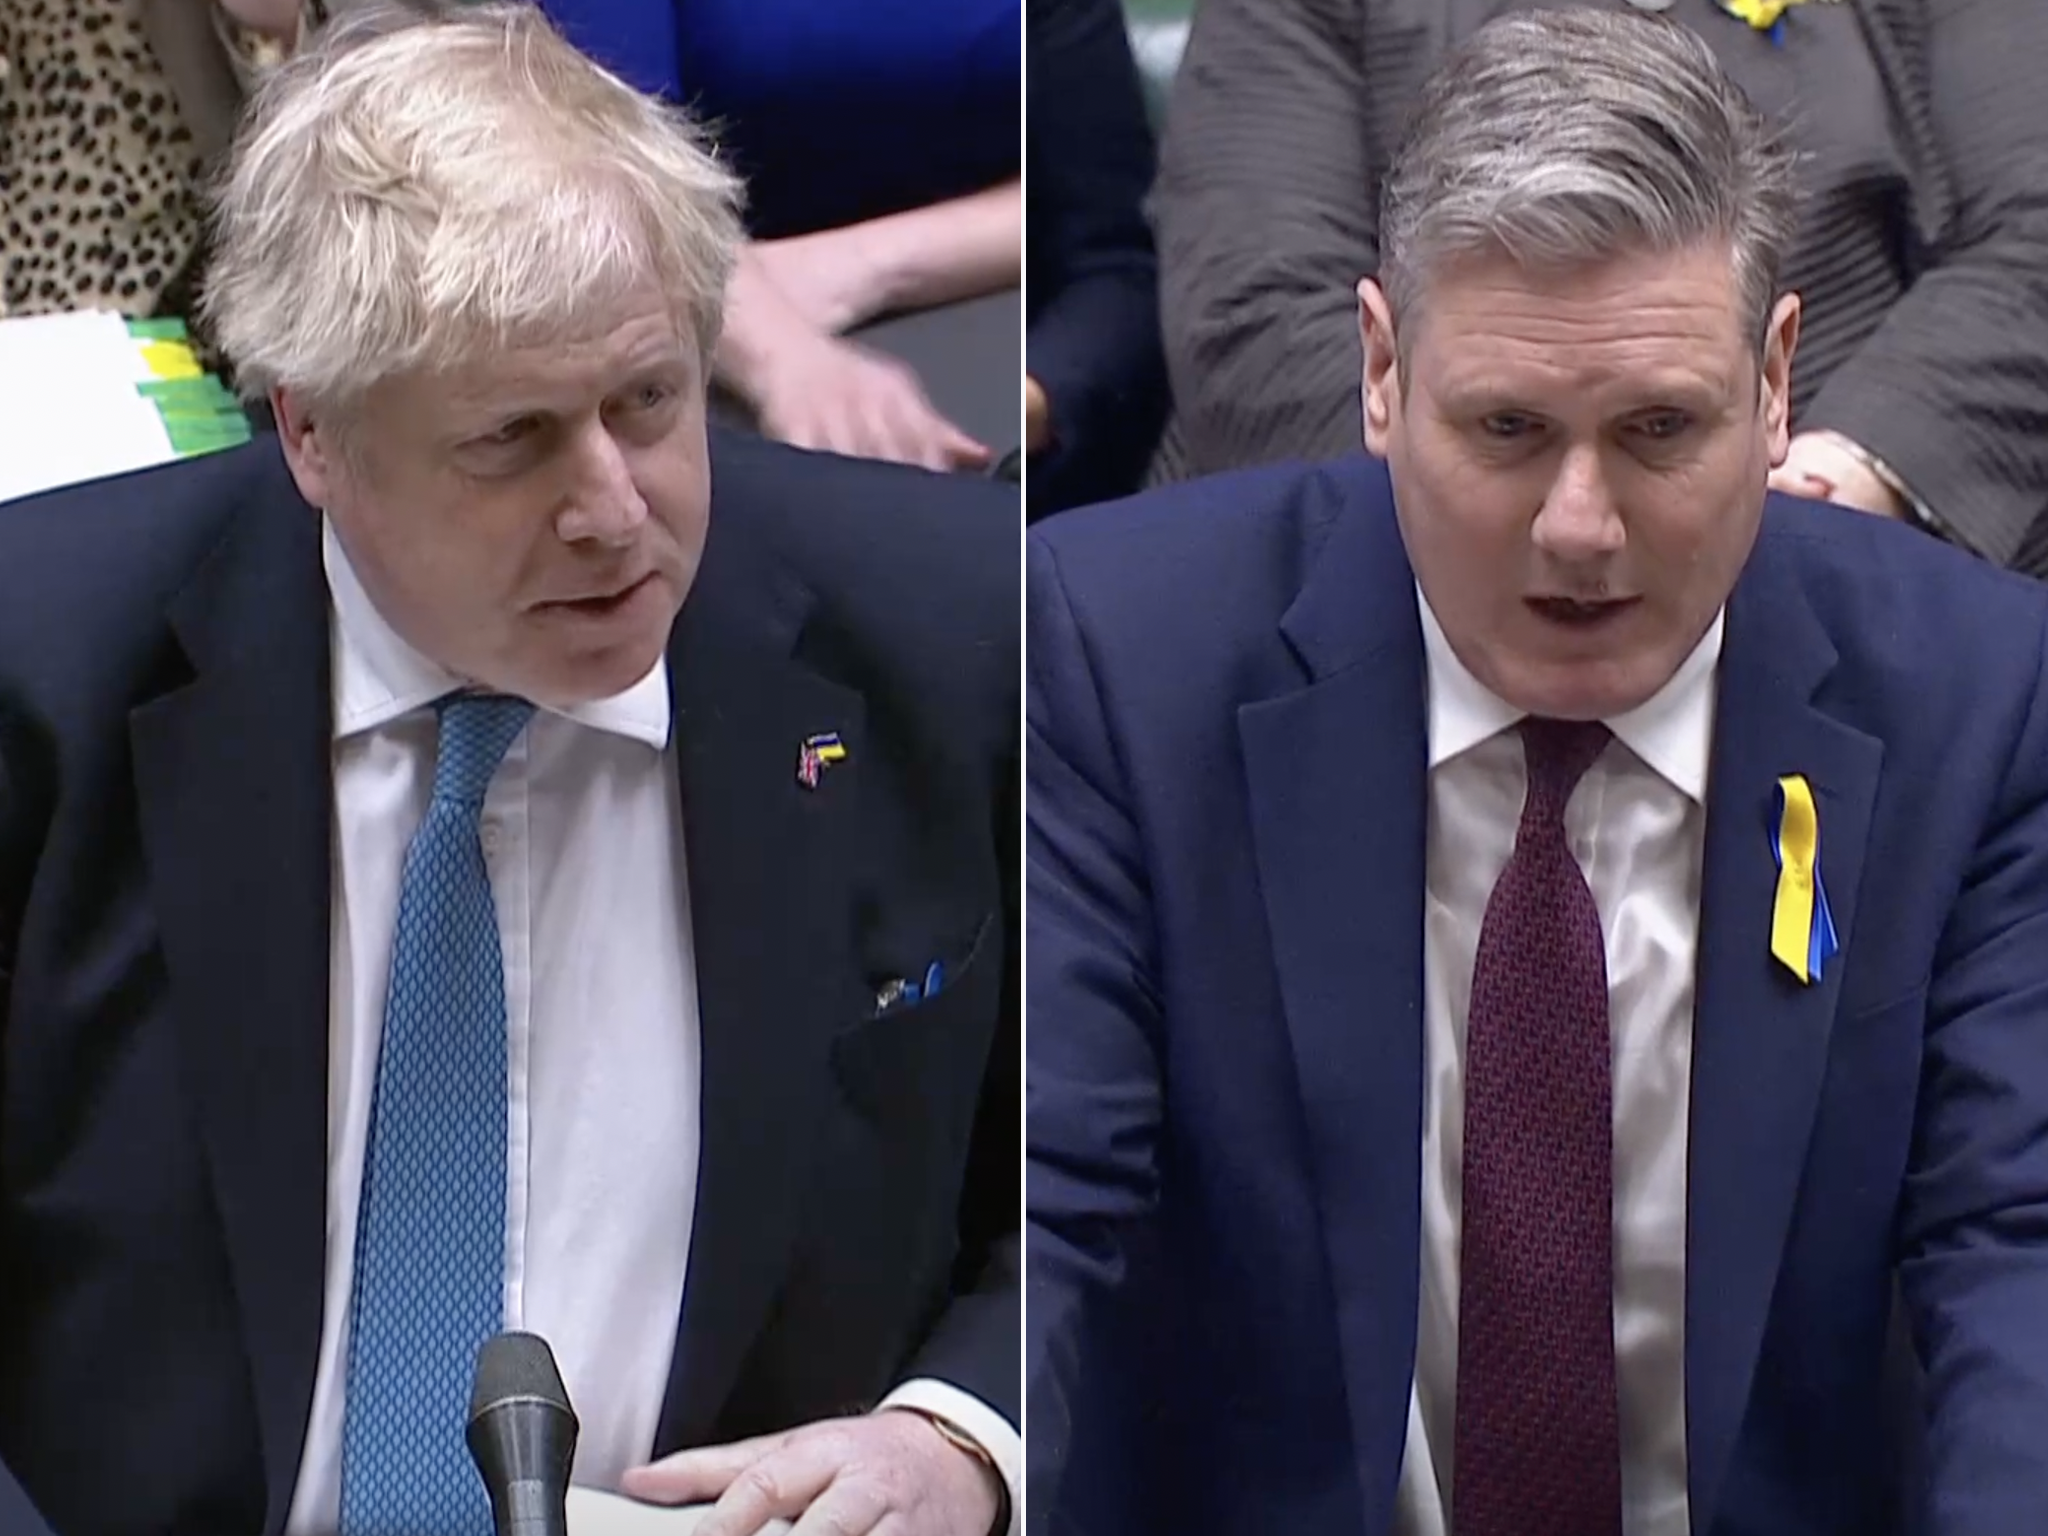 Boris Johnson has been fined for Partygate while Sir Keir Starmer’s Beergate is currently under police investigation